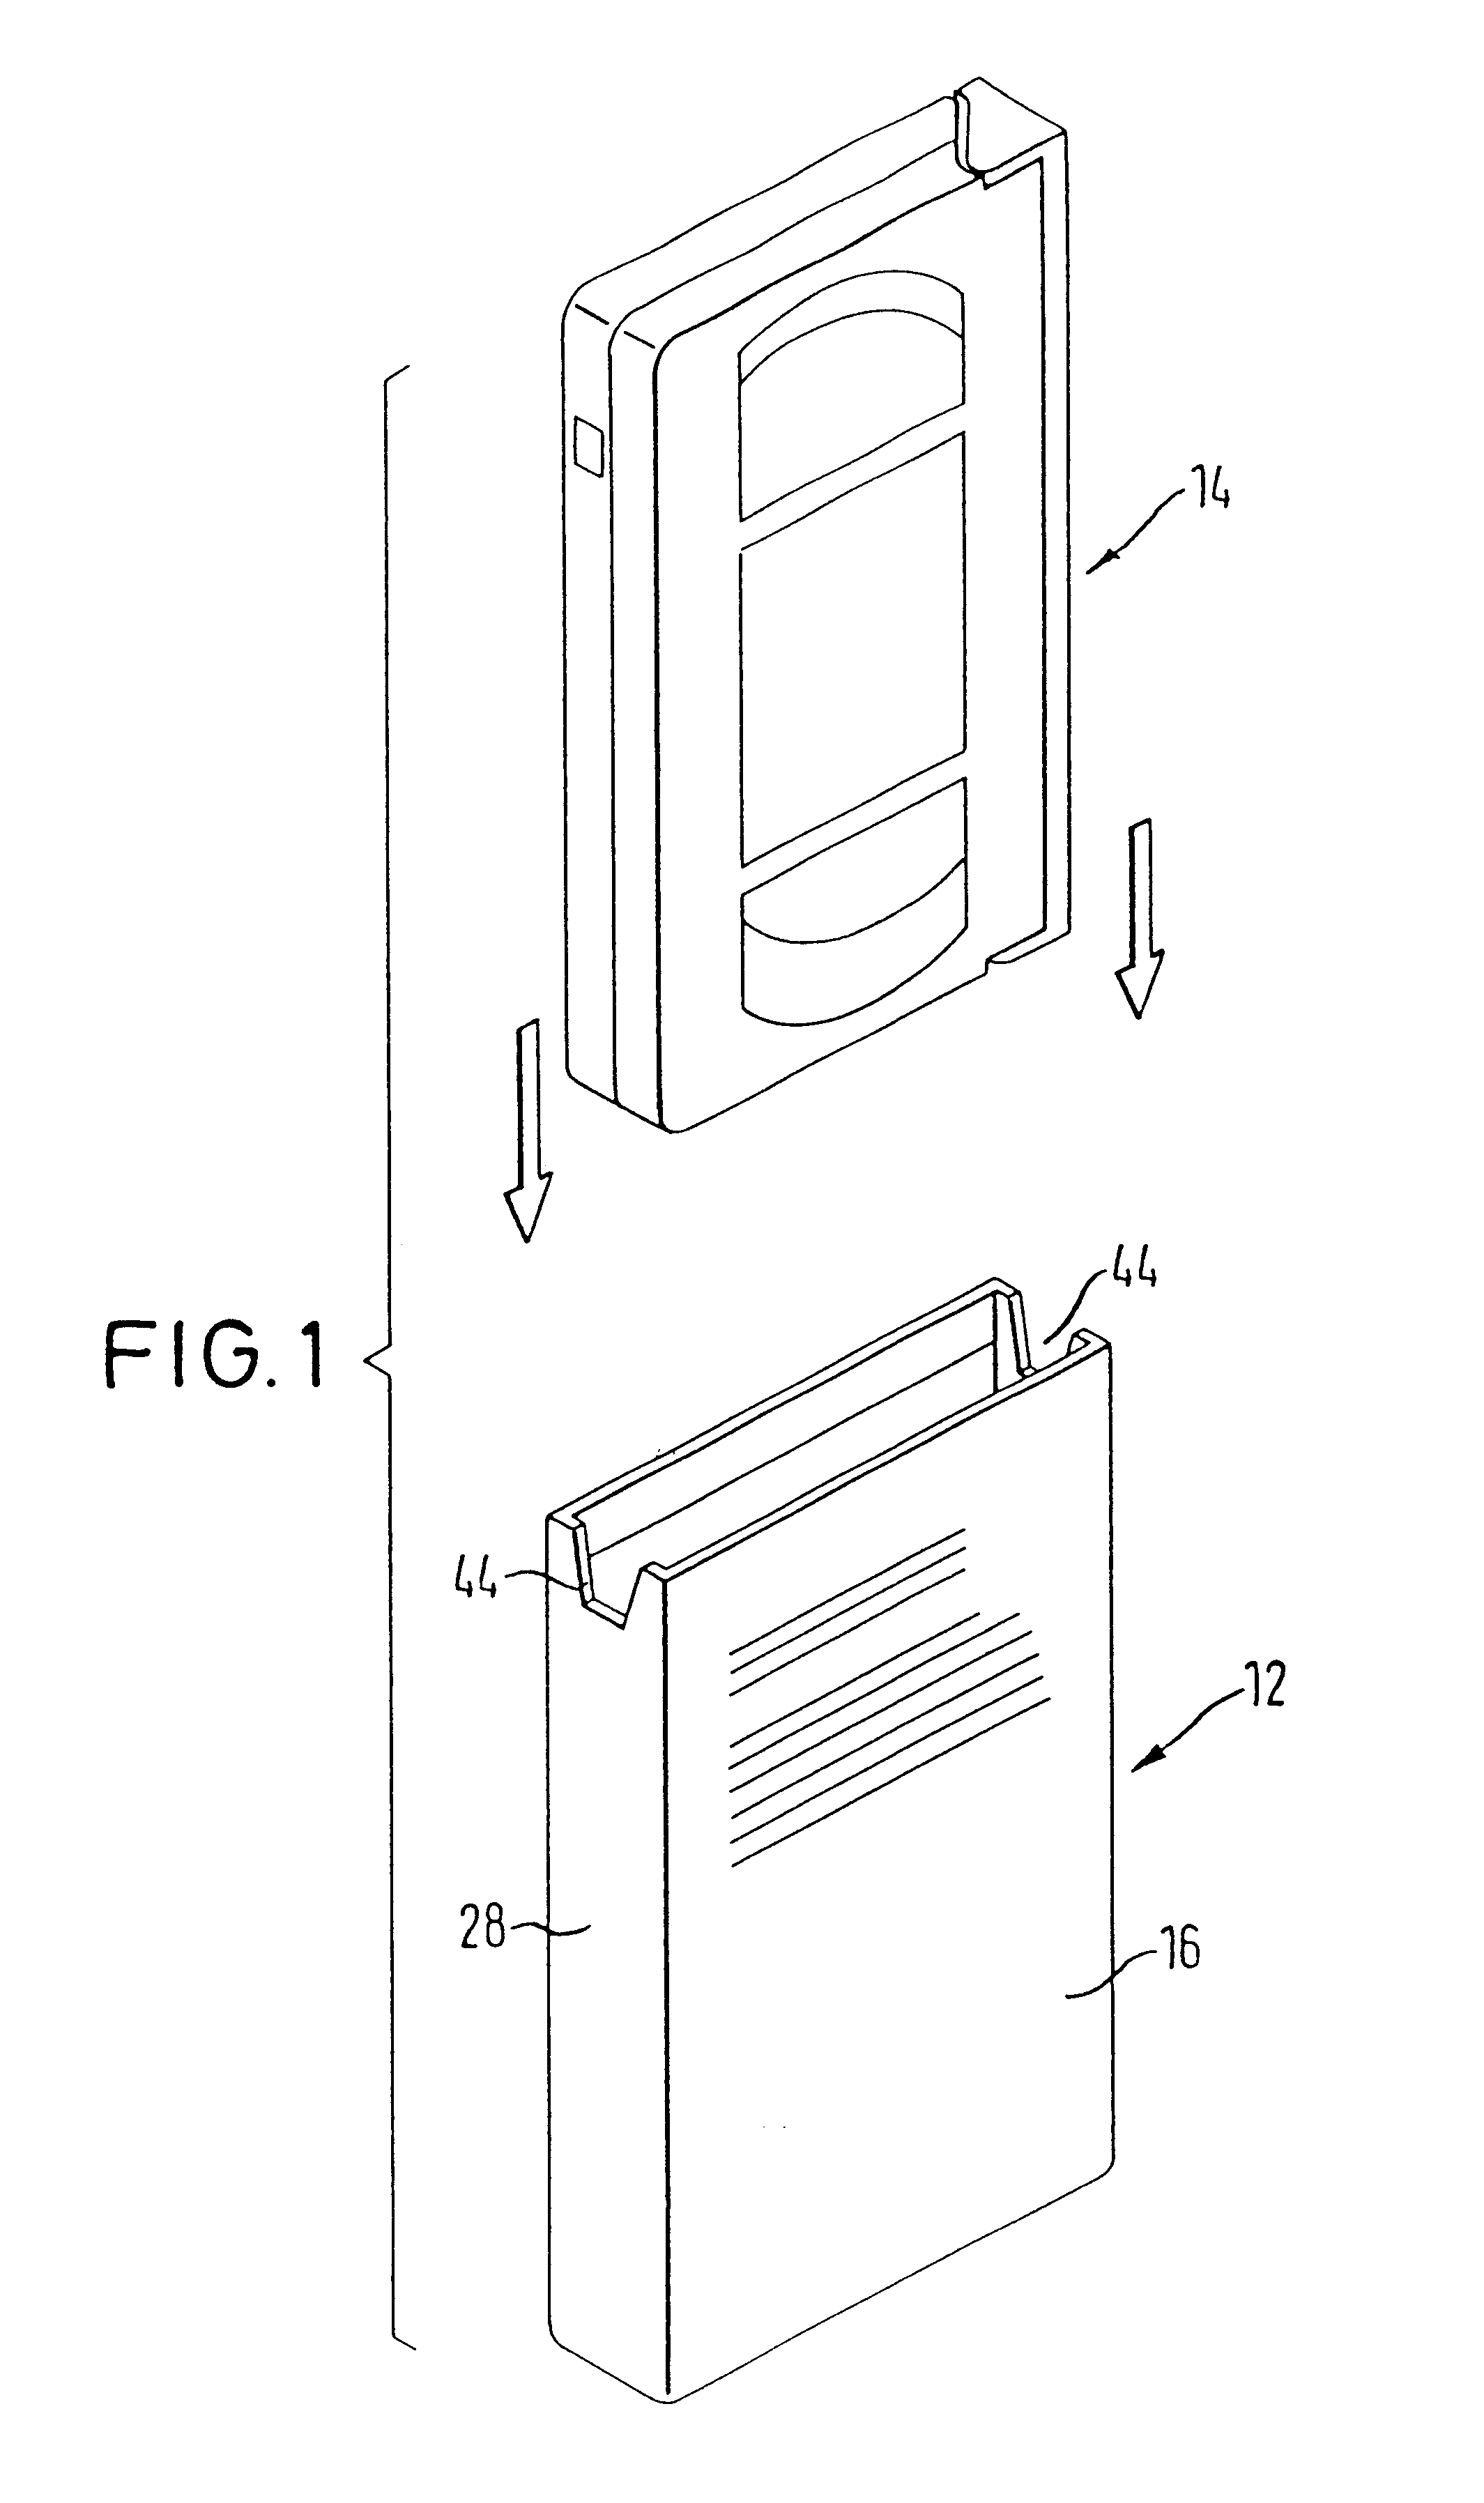 Printable blank of improved durability for forming video cassette boxes